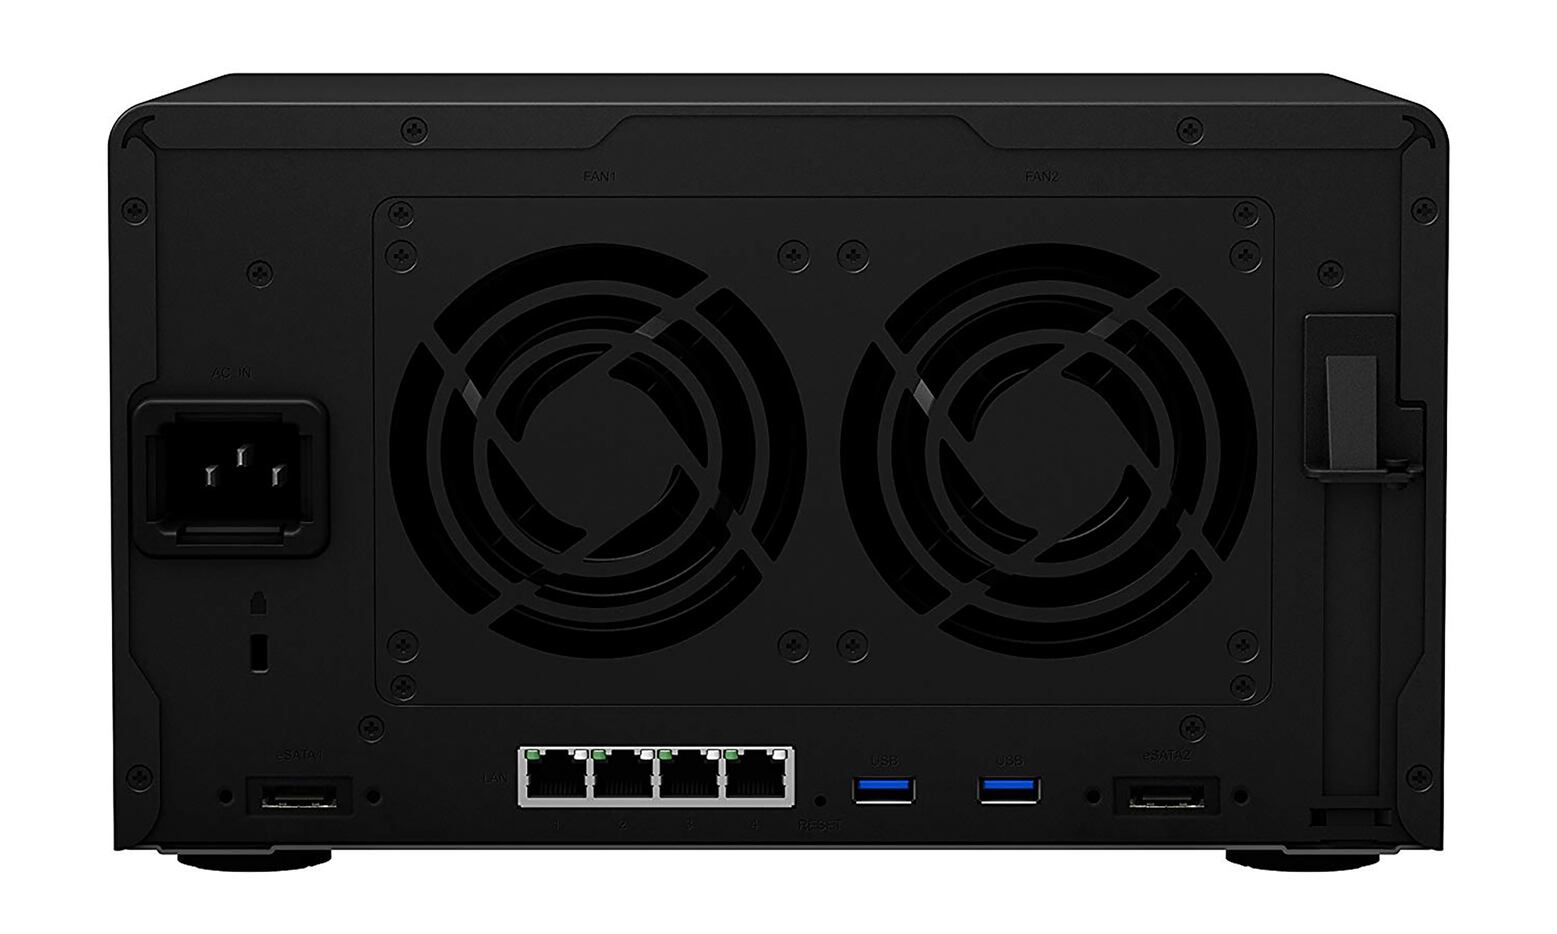 The Synology 1618+ has four ethernet ports that can be combined to really speed up data...